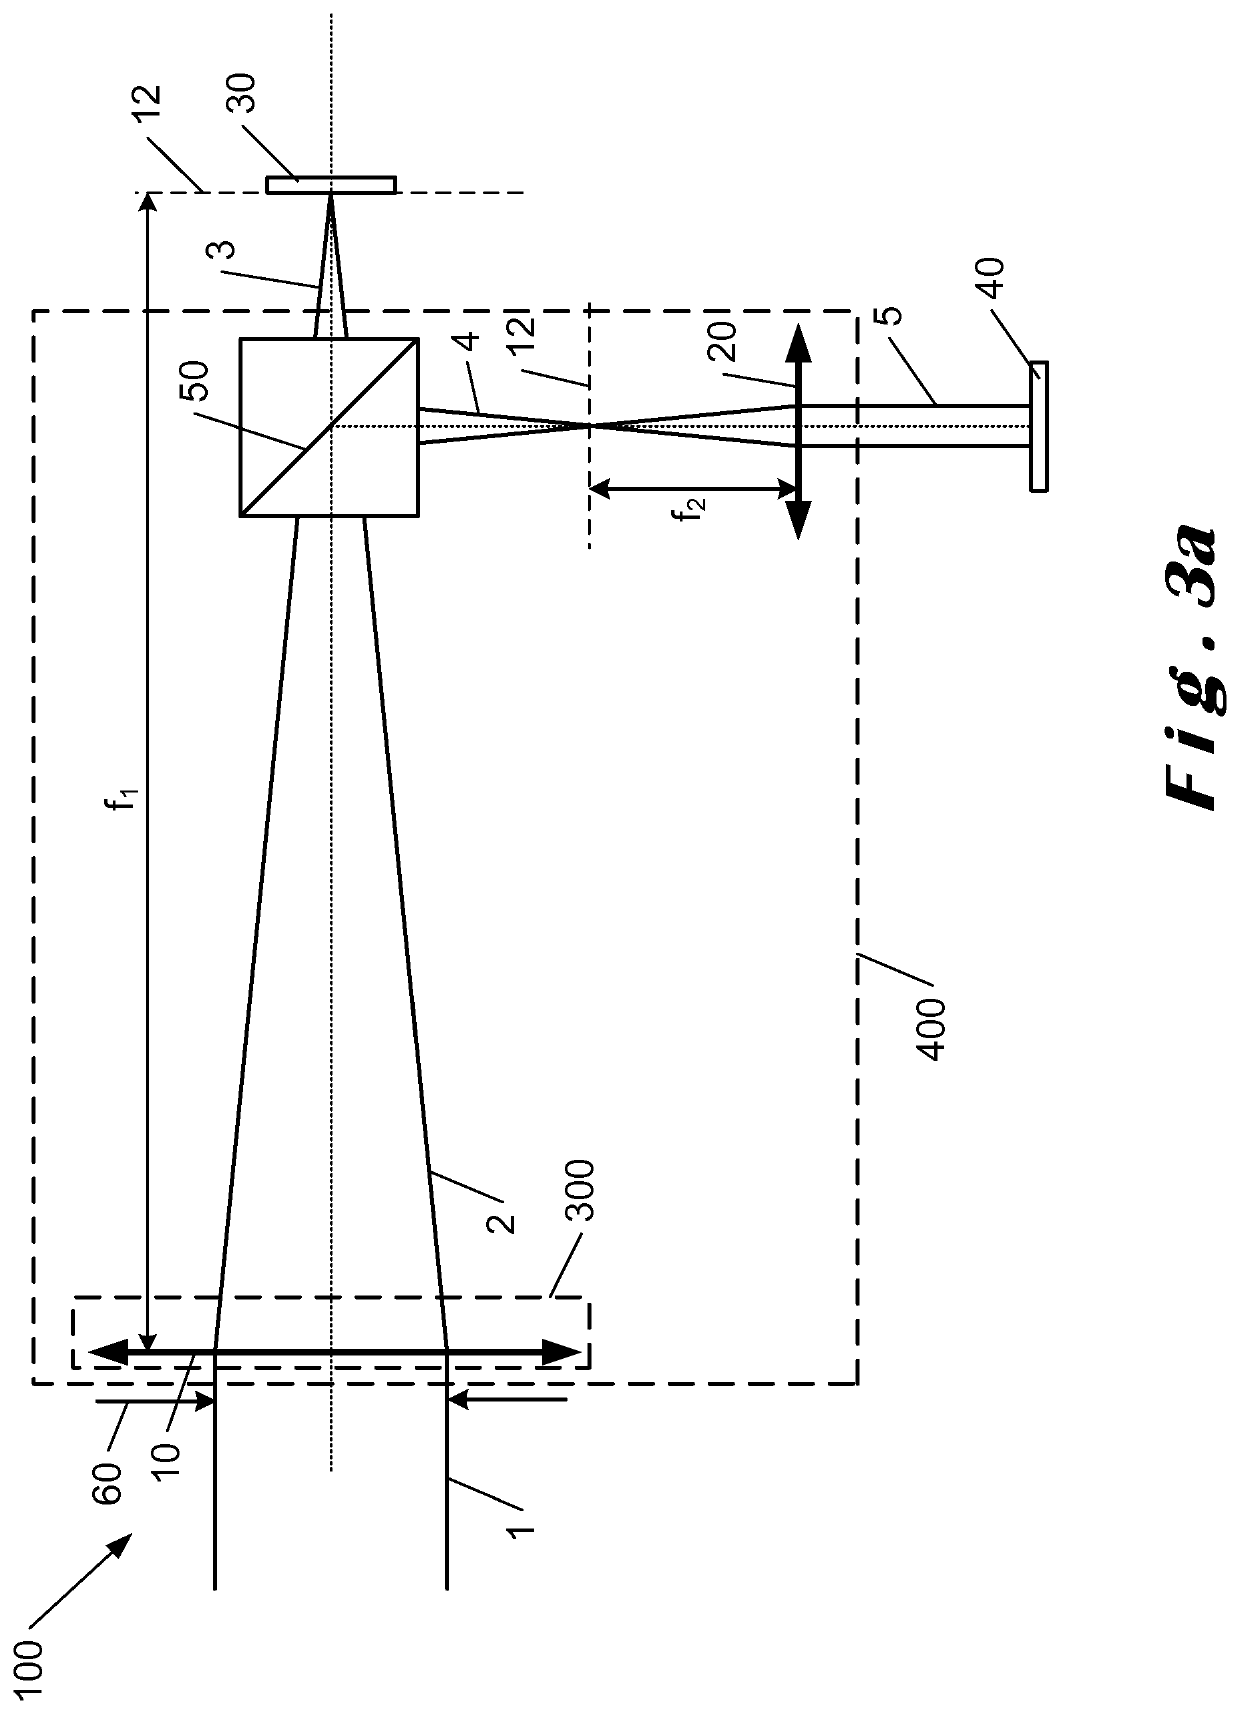 Optical device and method for detecting the drift of a light beam